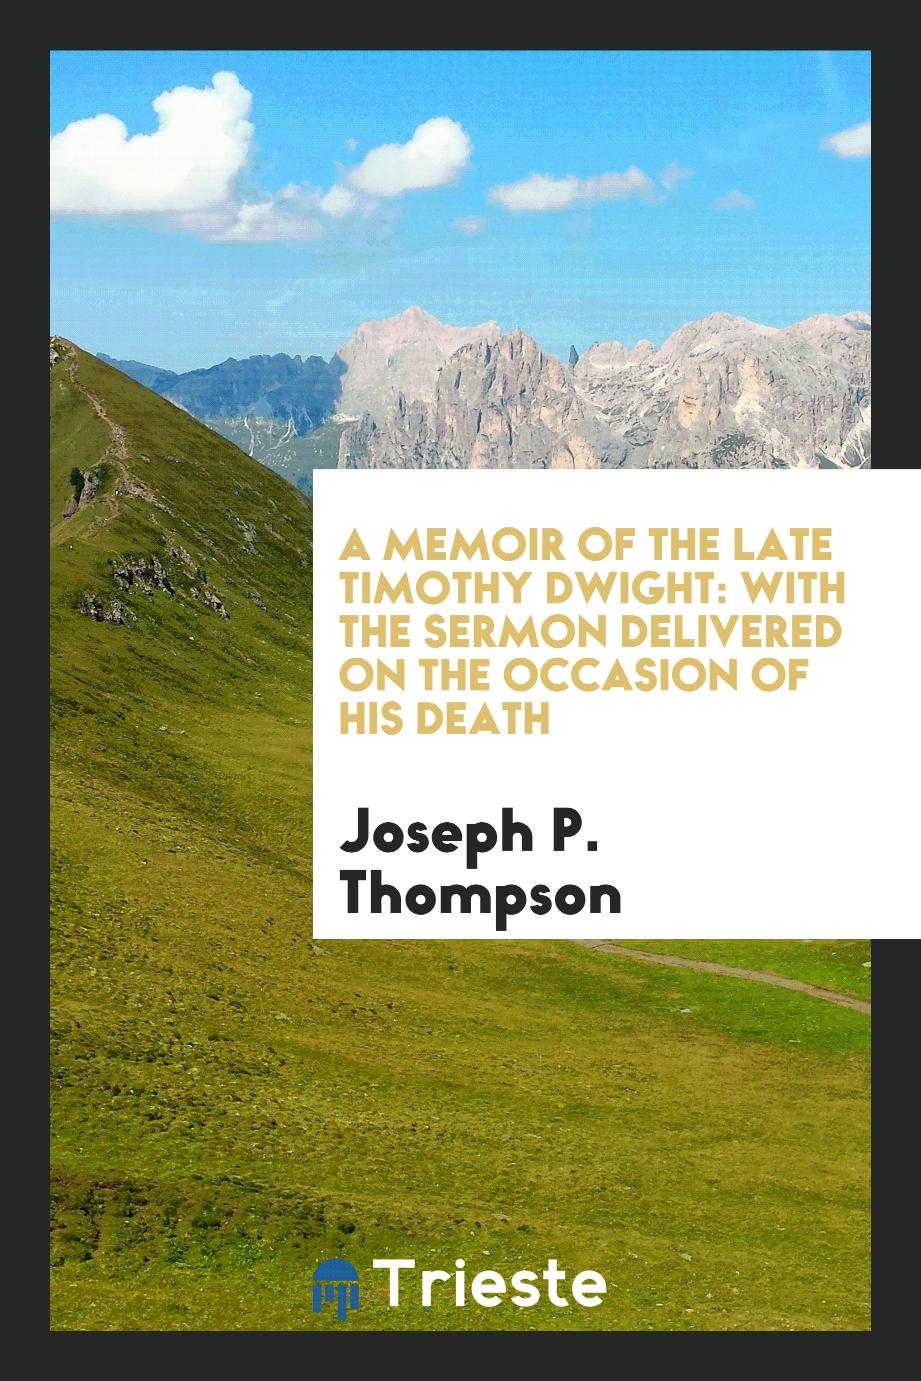 A Memoir of the Late Timothy Dwight: With the Sermon Delivered on the Occasion of His Death